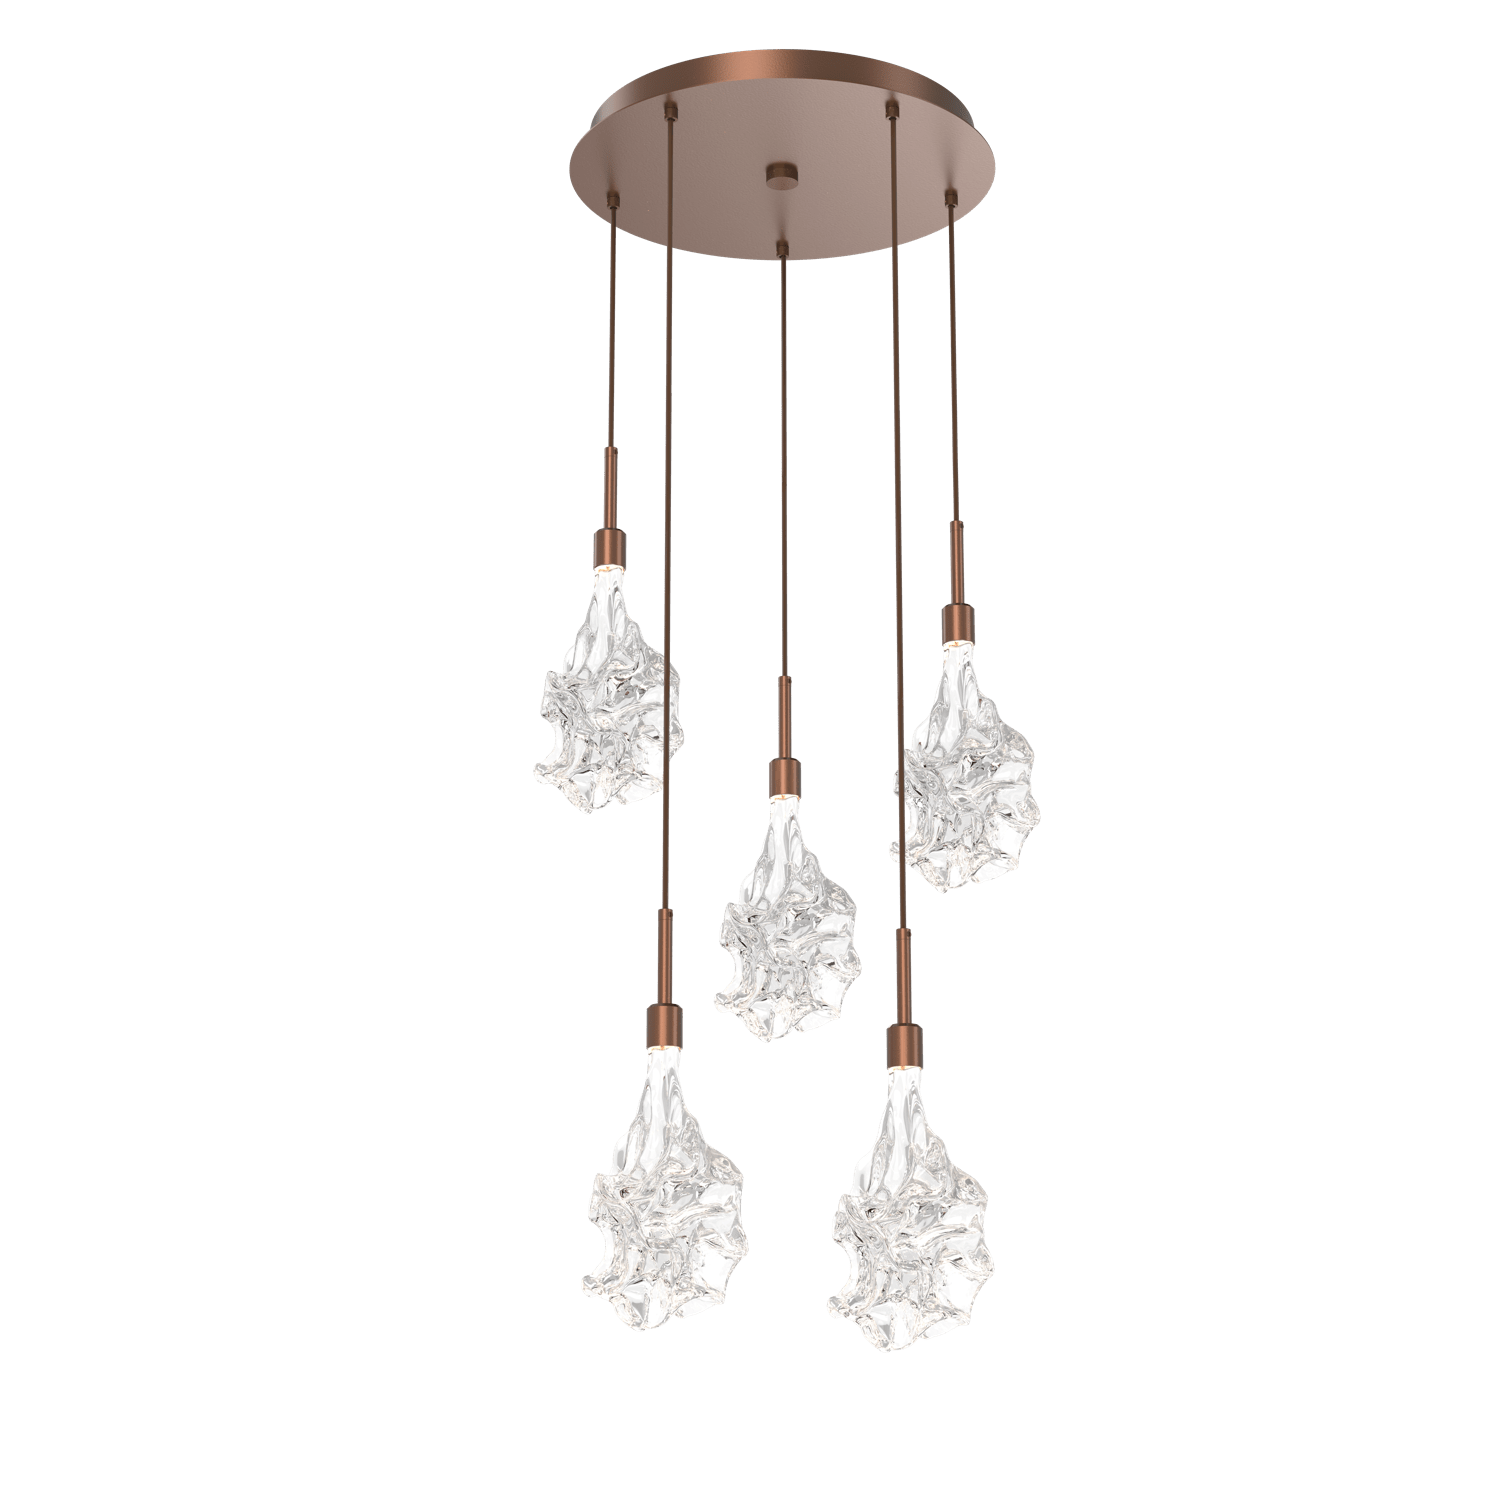 CHB0059-05-BB-Hammerton-Studio-Blossom-5-light-round-pendant-chandelier-with-burnished-bronze-finish-and-clear-handblown-crystal-glass-shades-and-LED-lamping